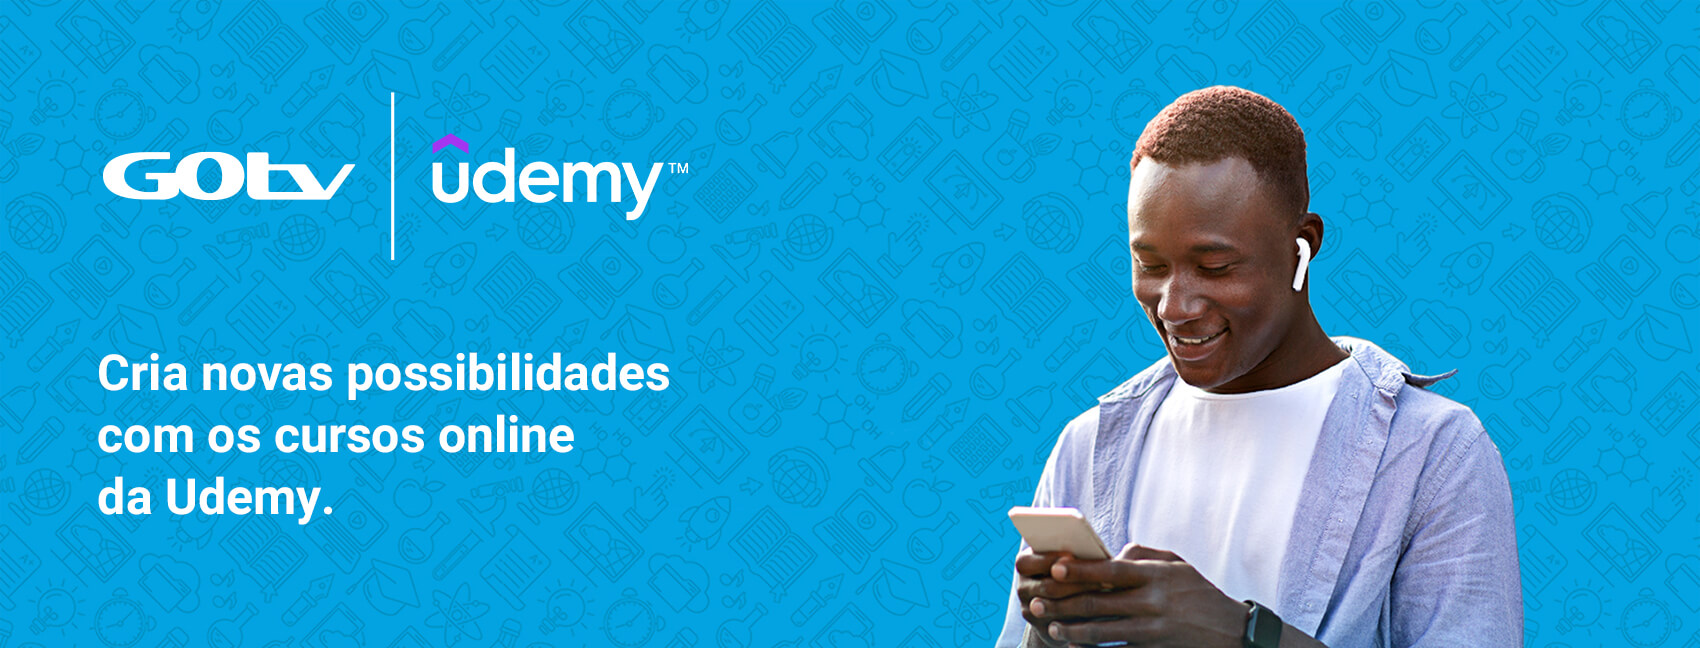 Udemy, a leading destination for learning and teaching online, is partnering with MultiChoice